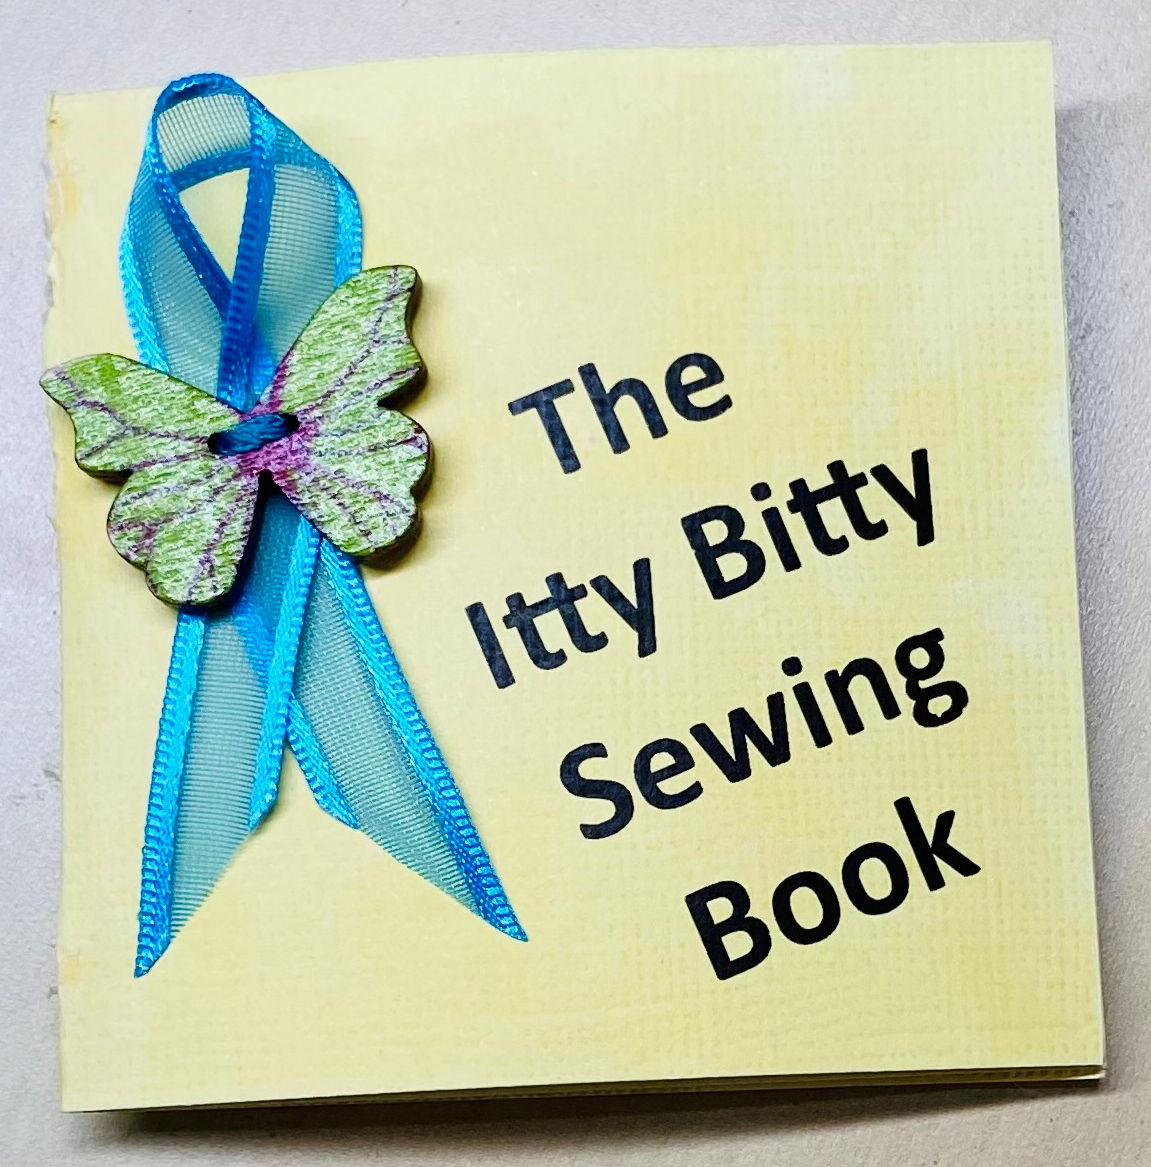 The Itty Bitty Sewing Book